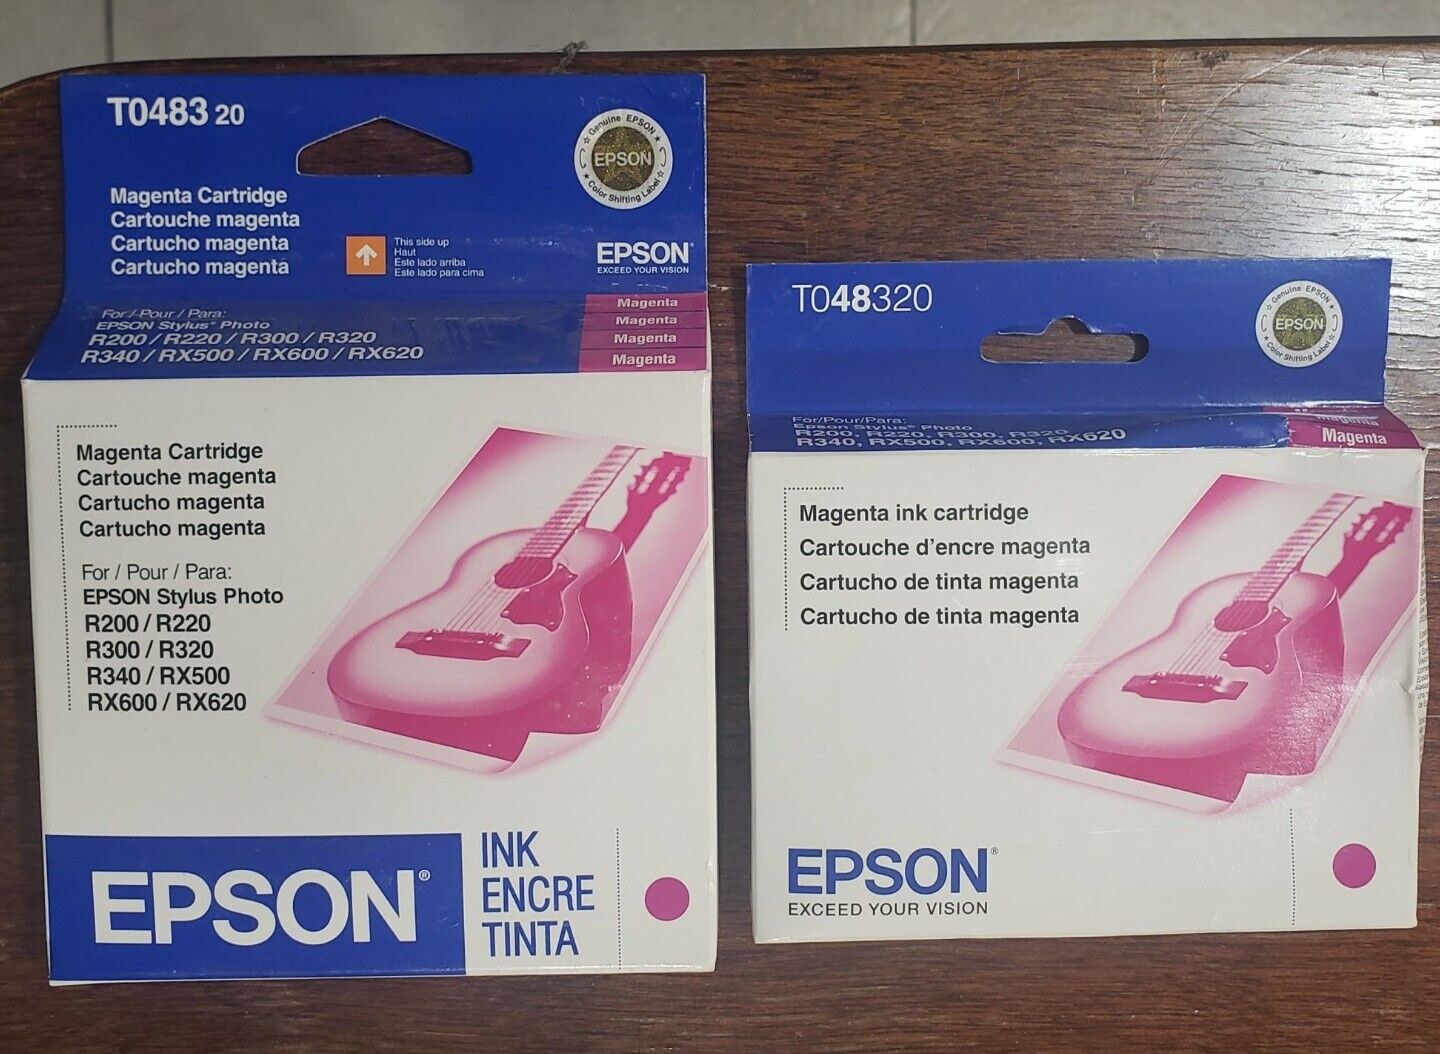 Genuine Epson Ink Magenta Cartridge T048320 brand new in boxes. There are two 